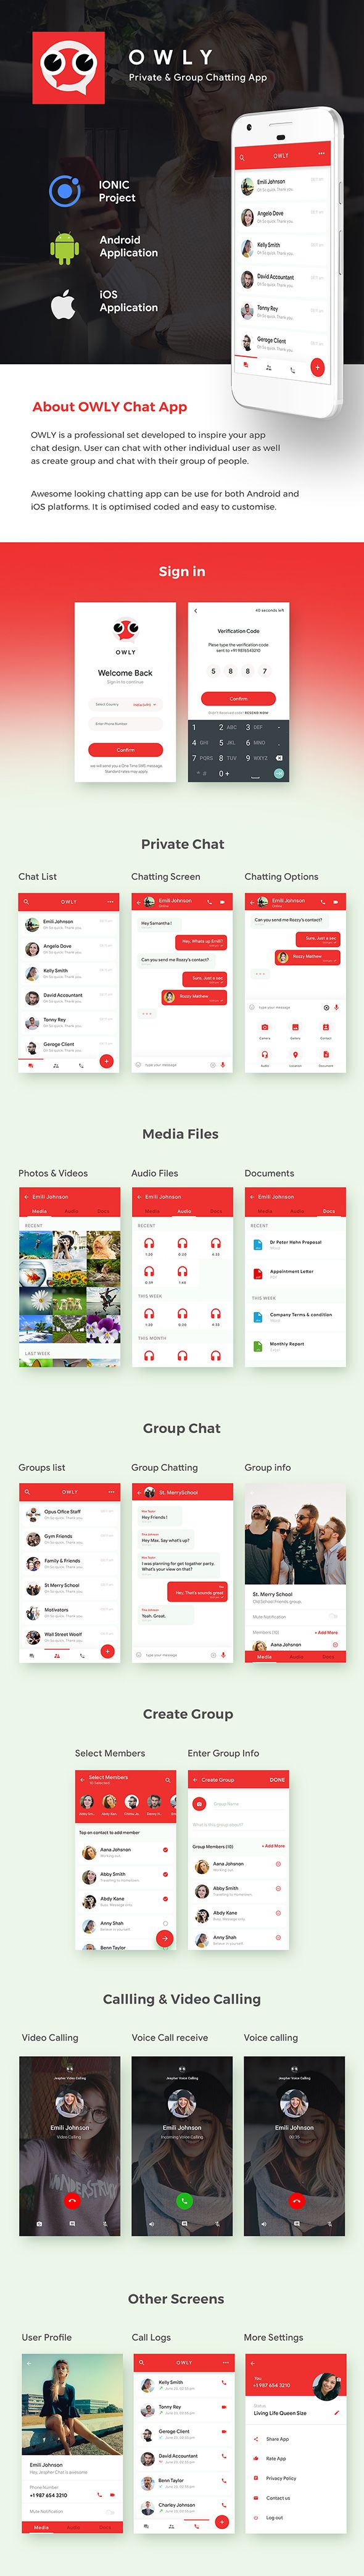 Chatting Android App Template + Chatting iOS App template (HMTL + CSS) IONIC 3 | OWLY - 2